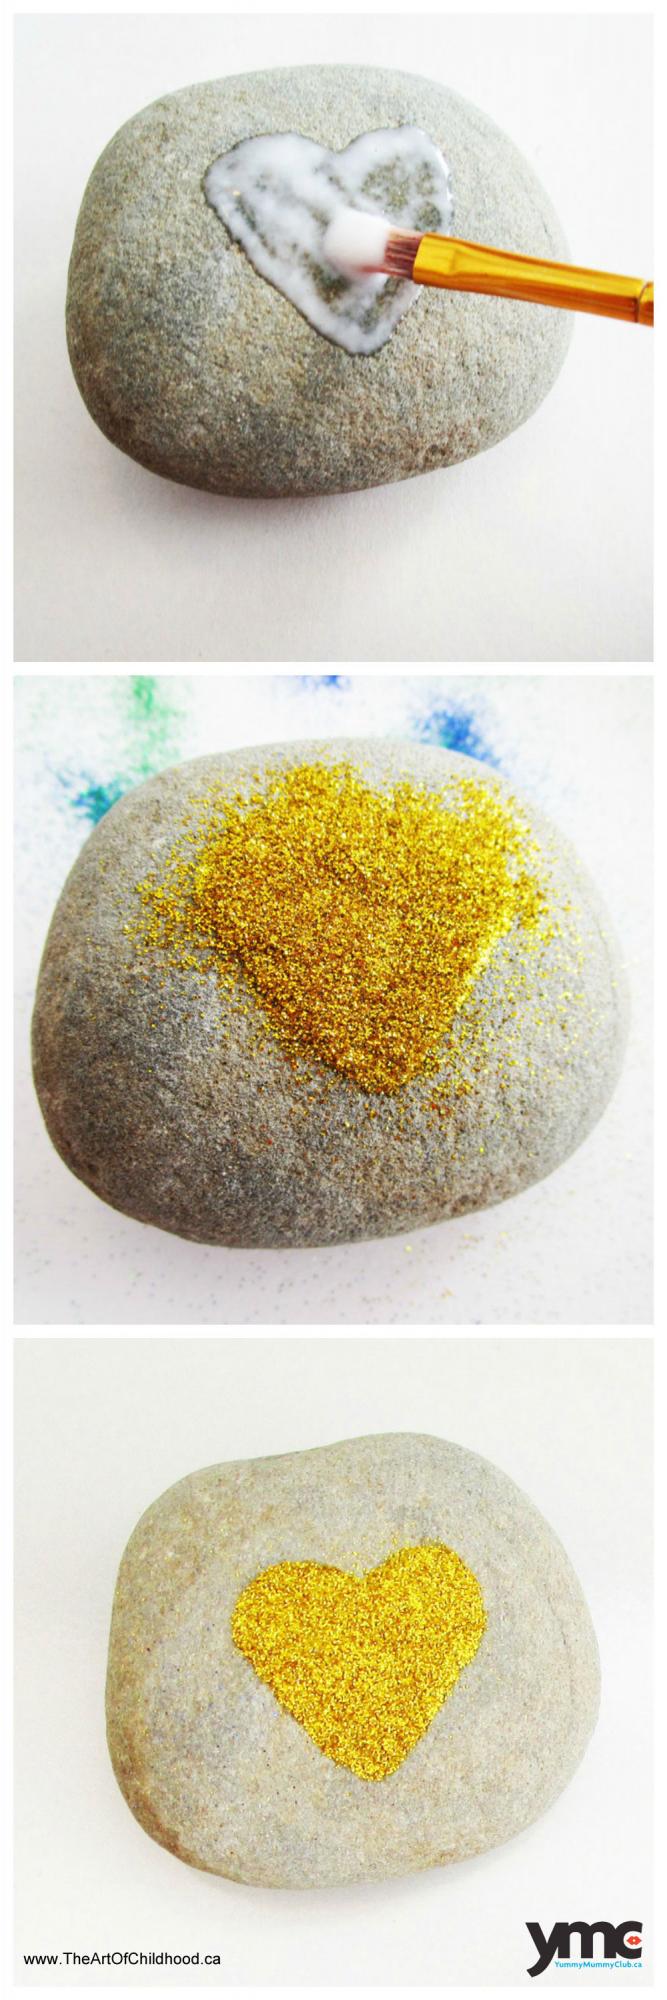 Paint a heart on a rock using glue, sprinkle it with glitter, shake off the glitter and voila.